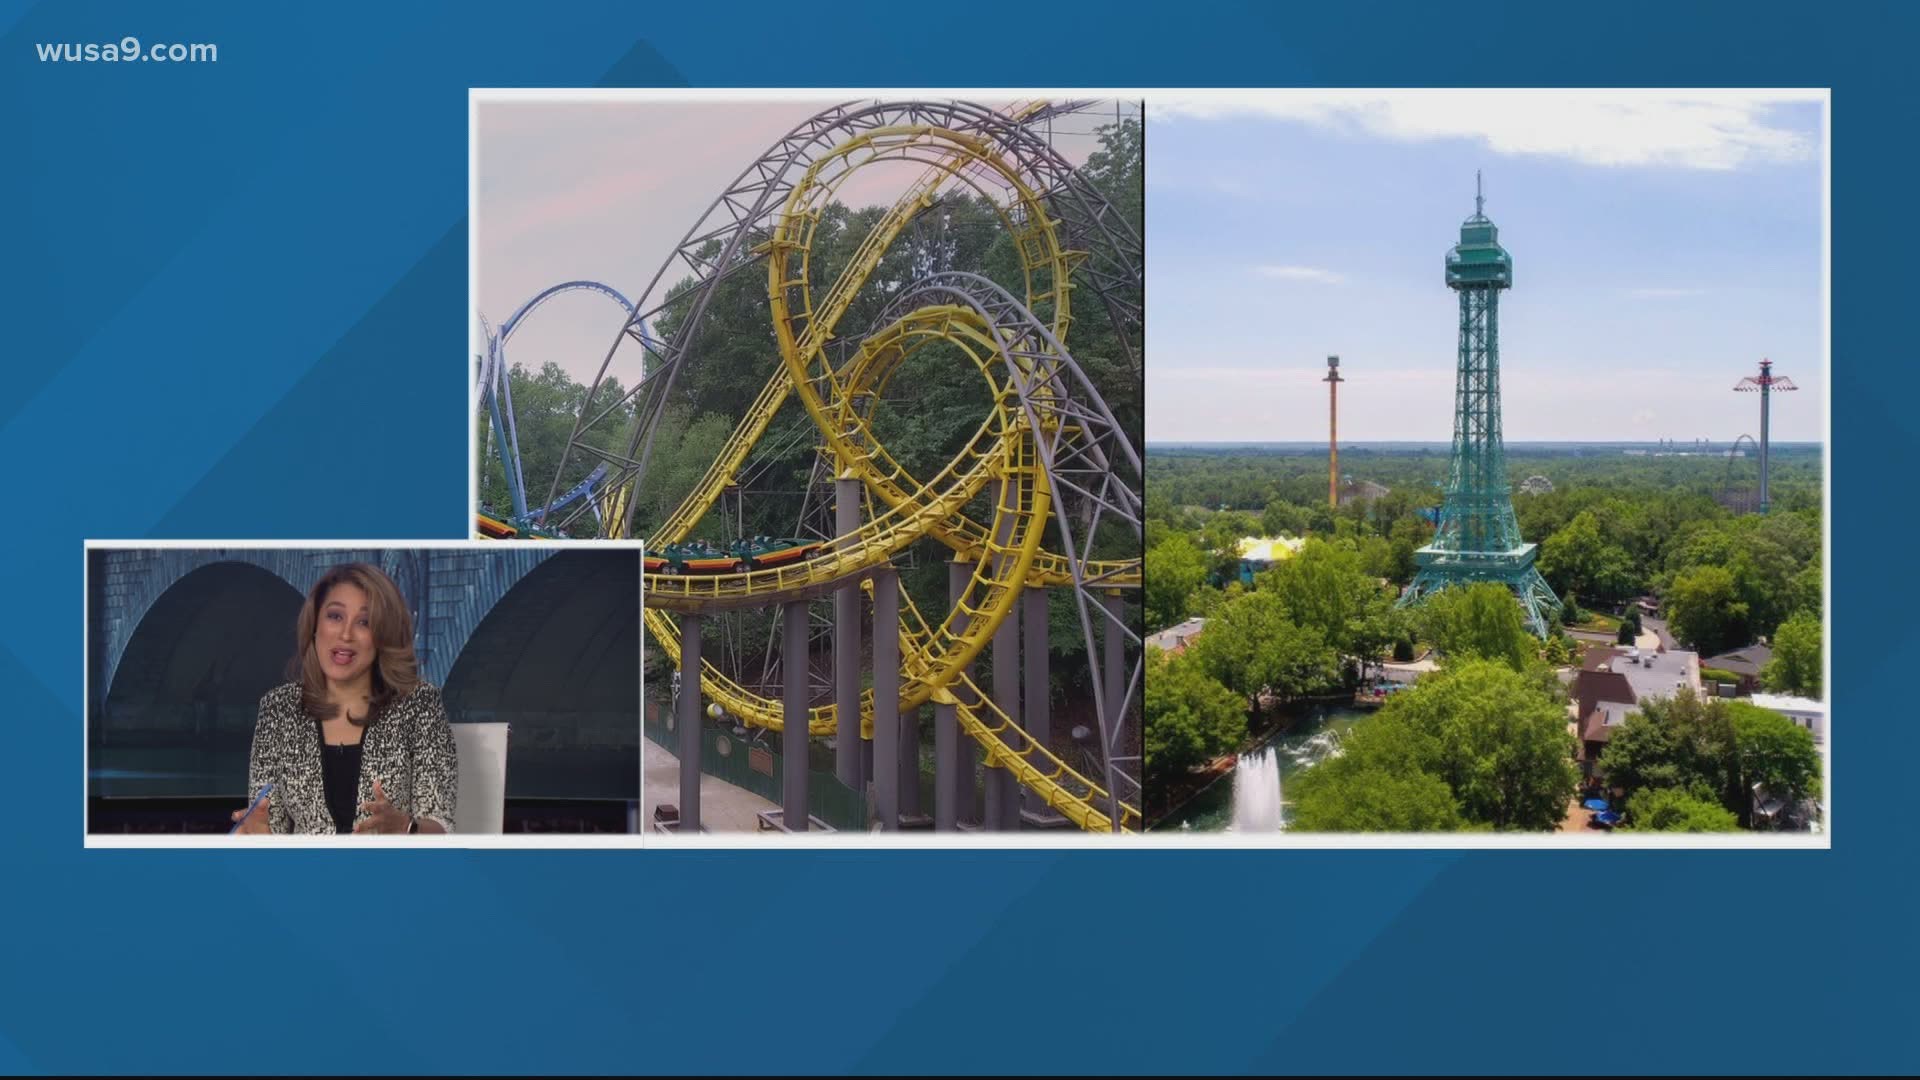 Spokespeople for Busch Gardens and Kings Dominion say limiting guests to 1,000 is not 'economically sustainable'